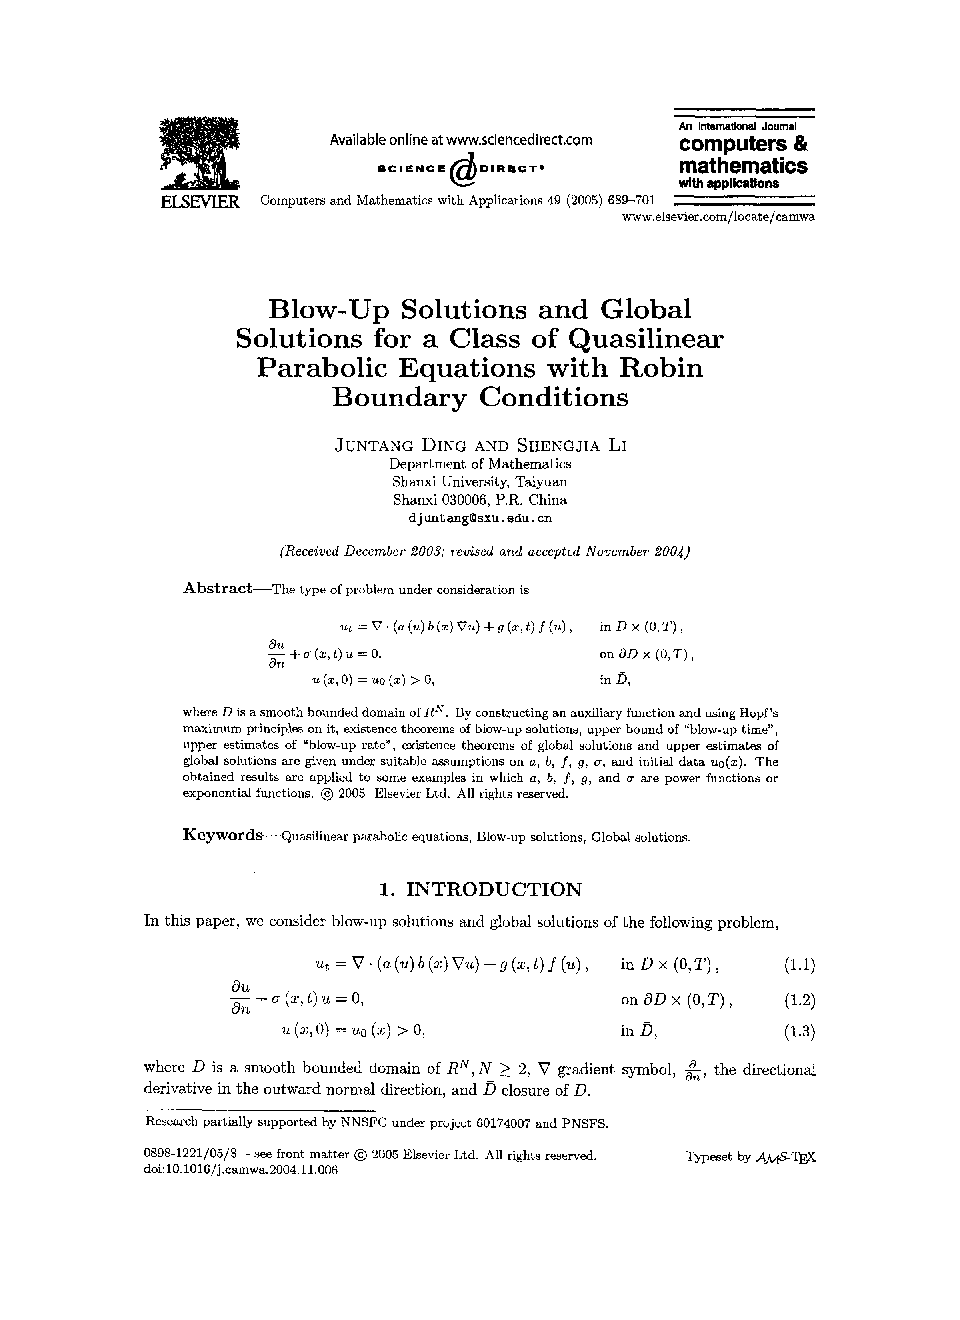 Blow-up solutions and global solutions for a class of quasilinear parabolic equations with robin boundary conditions